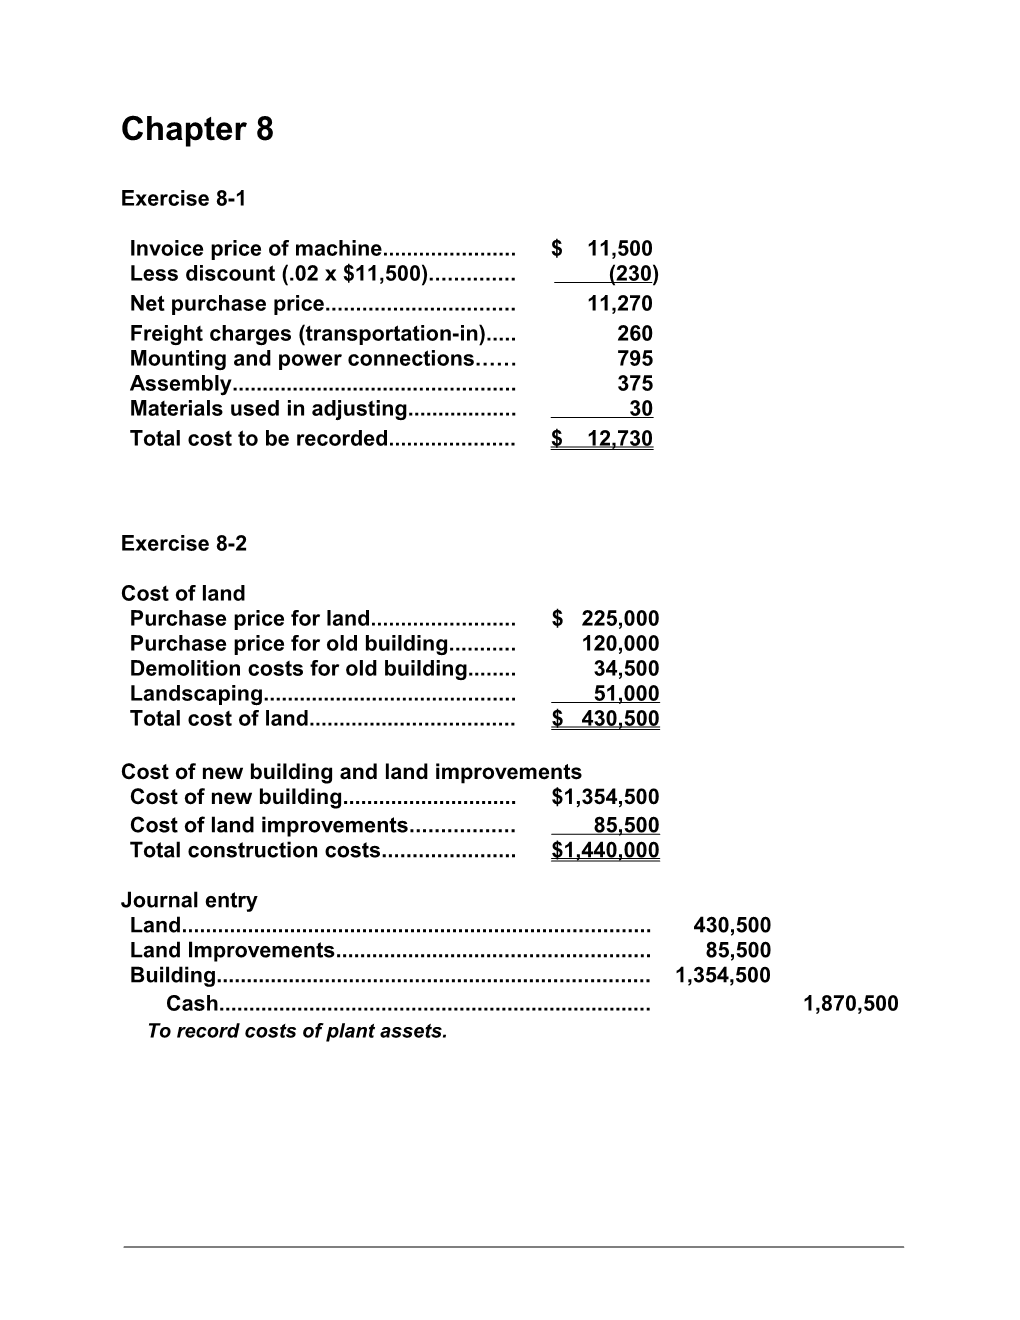 Cost of New Building and Land Improvements